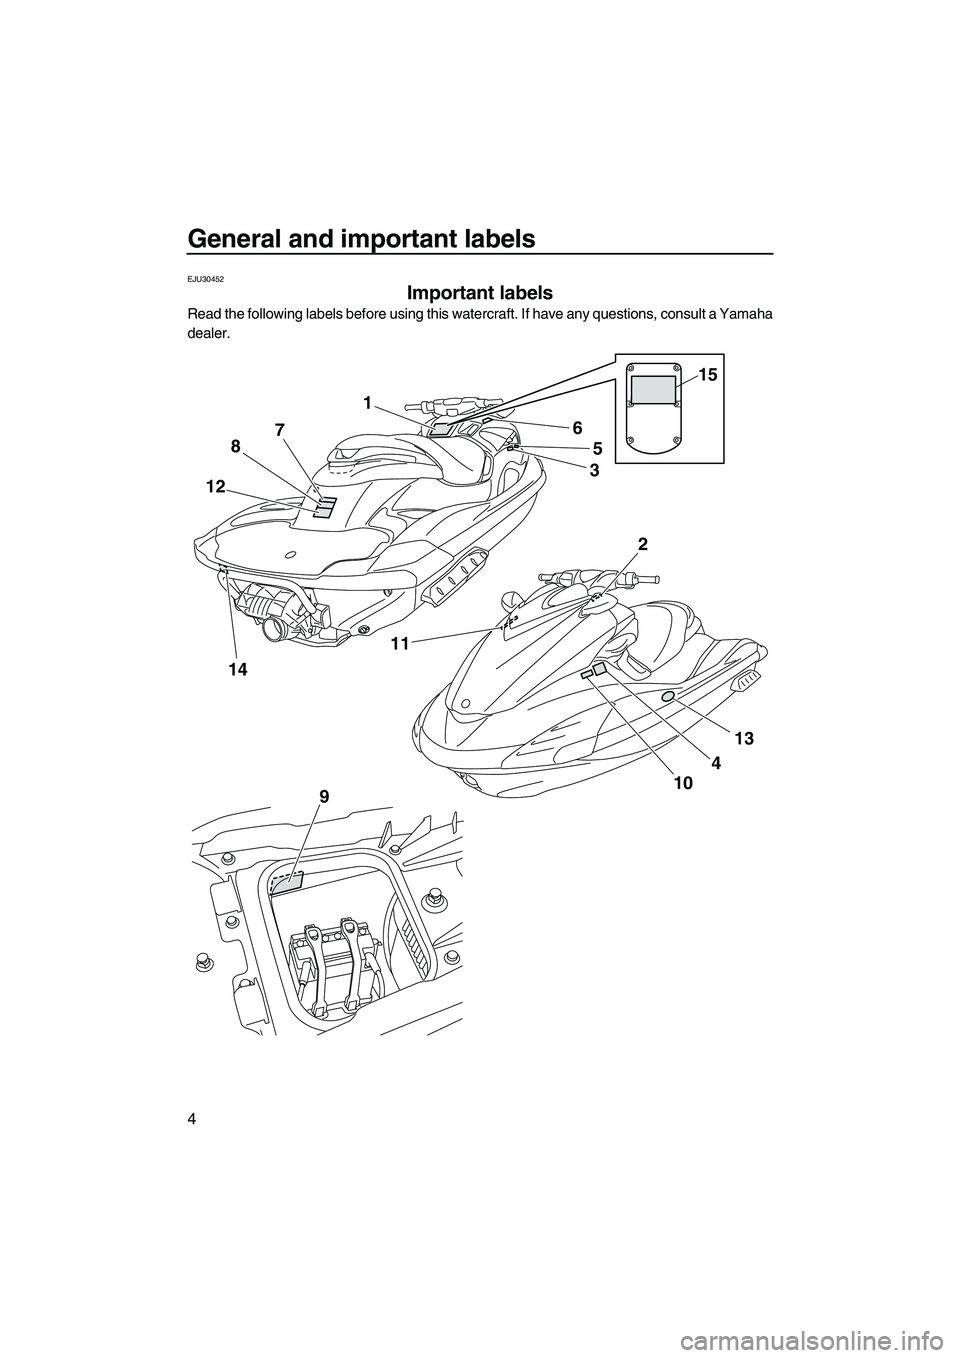 YAMAHA FZR 2012  Owners Manual General and important labels
4
EJU30452
Important labels 
Read the following labels before using this watercraft. If have any questions, consult a Yamaha
dealer.
1
5
3
4
10 6
87
12
1411
13
2
9
15
UF2R